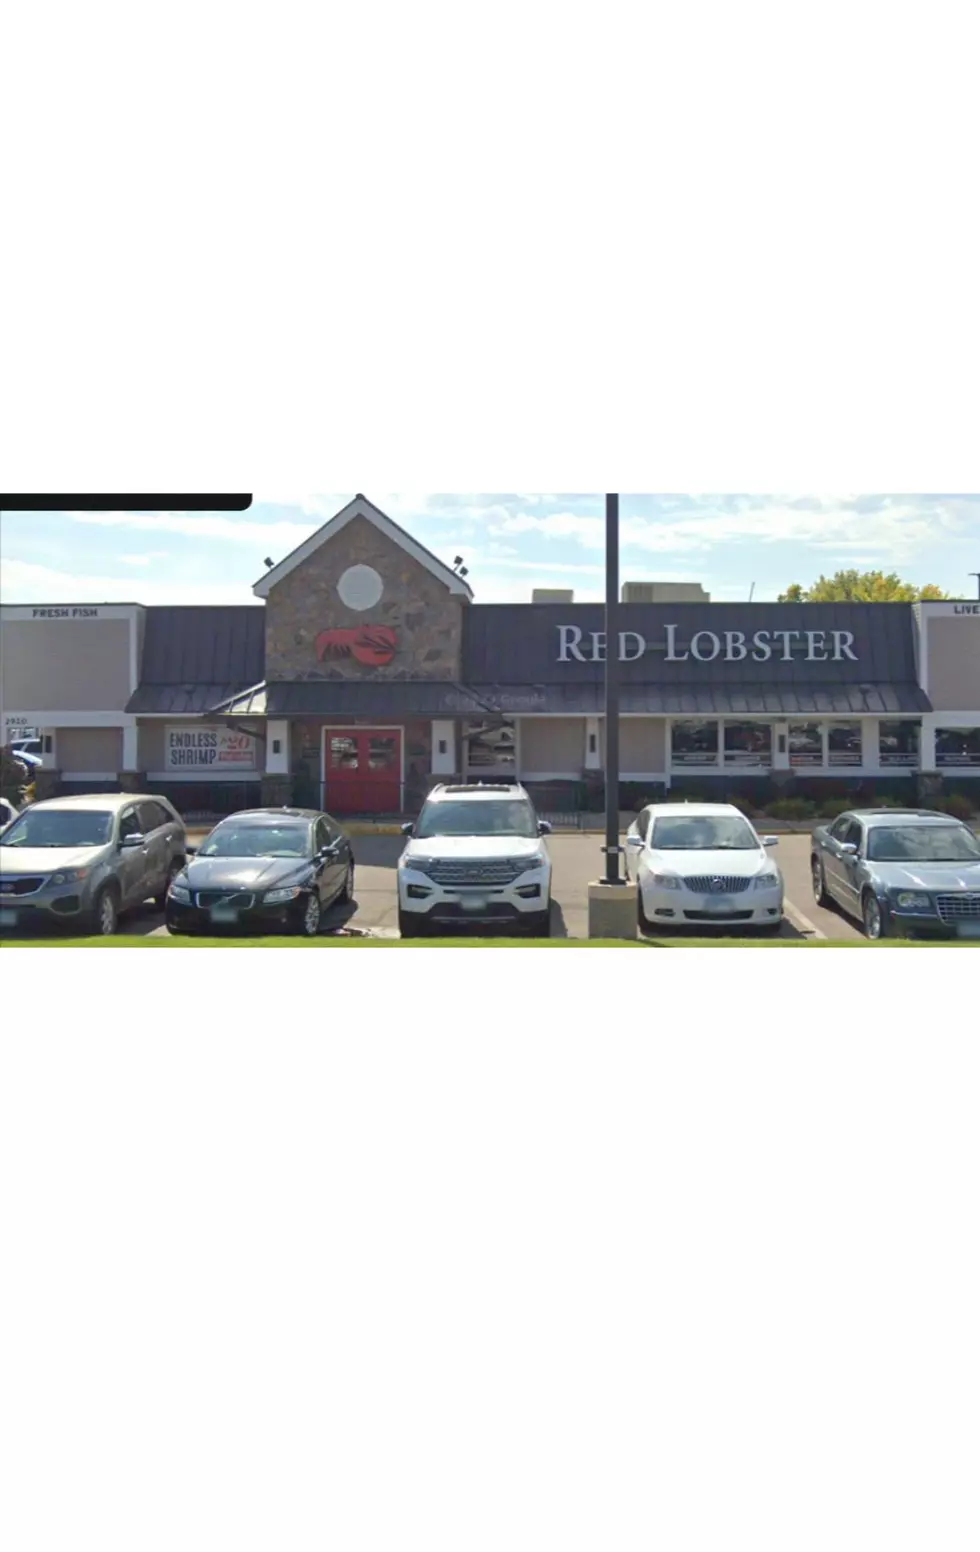 Red Lobster in St. Cloud Closing? Company May File for Bankruptcy